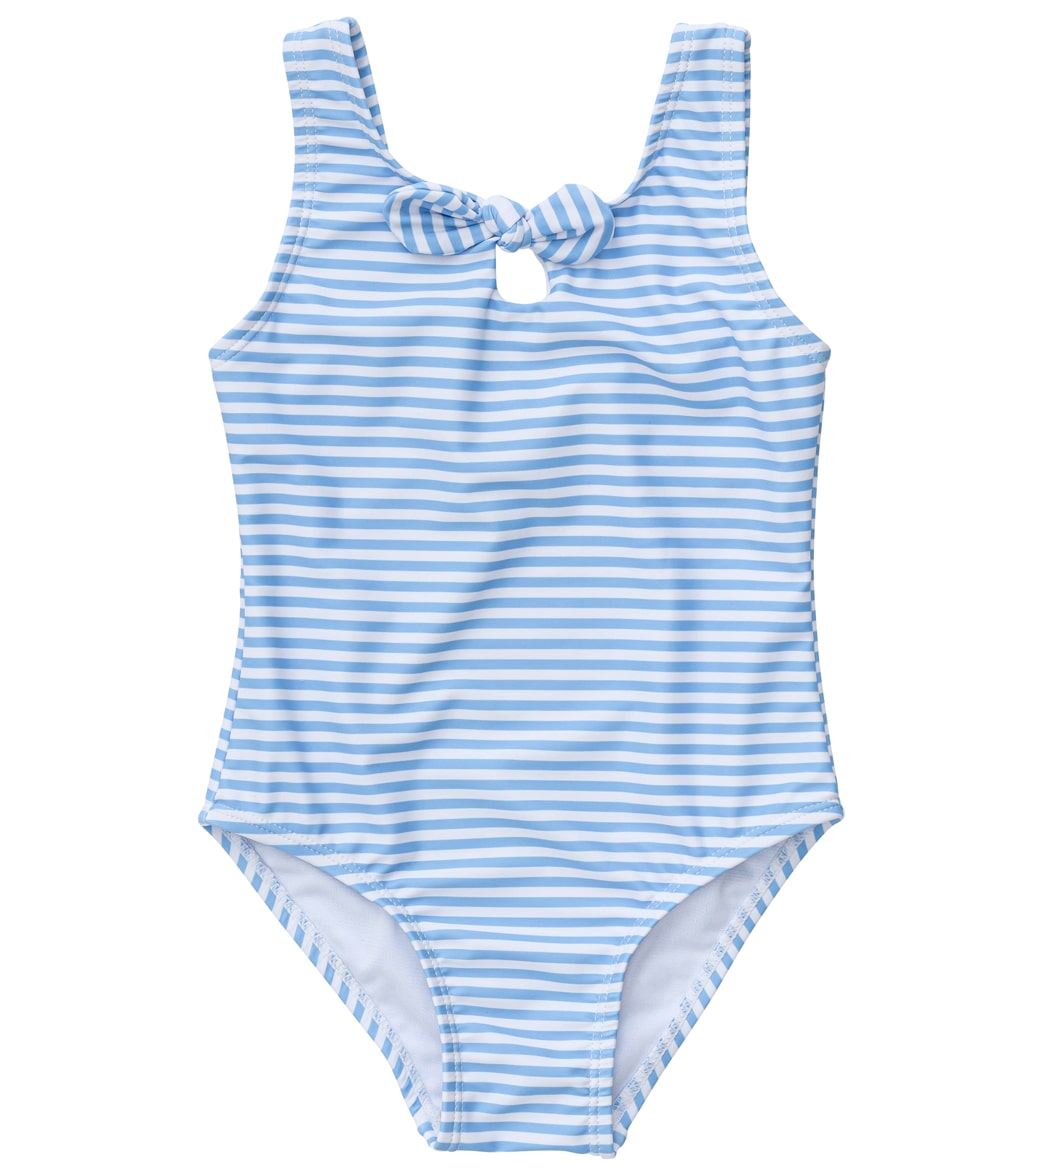 Snapper Rock Girls Powder Blue Sustainable Stripe Bow Swimsuit (Baby, Toddler)